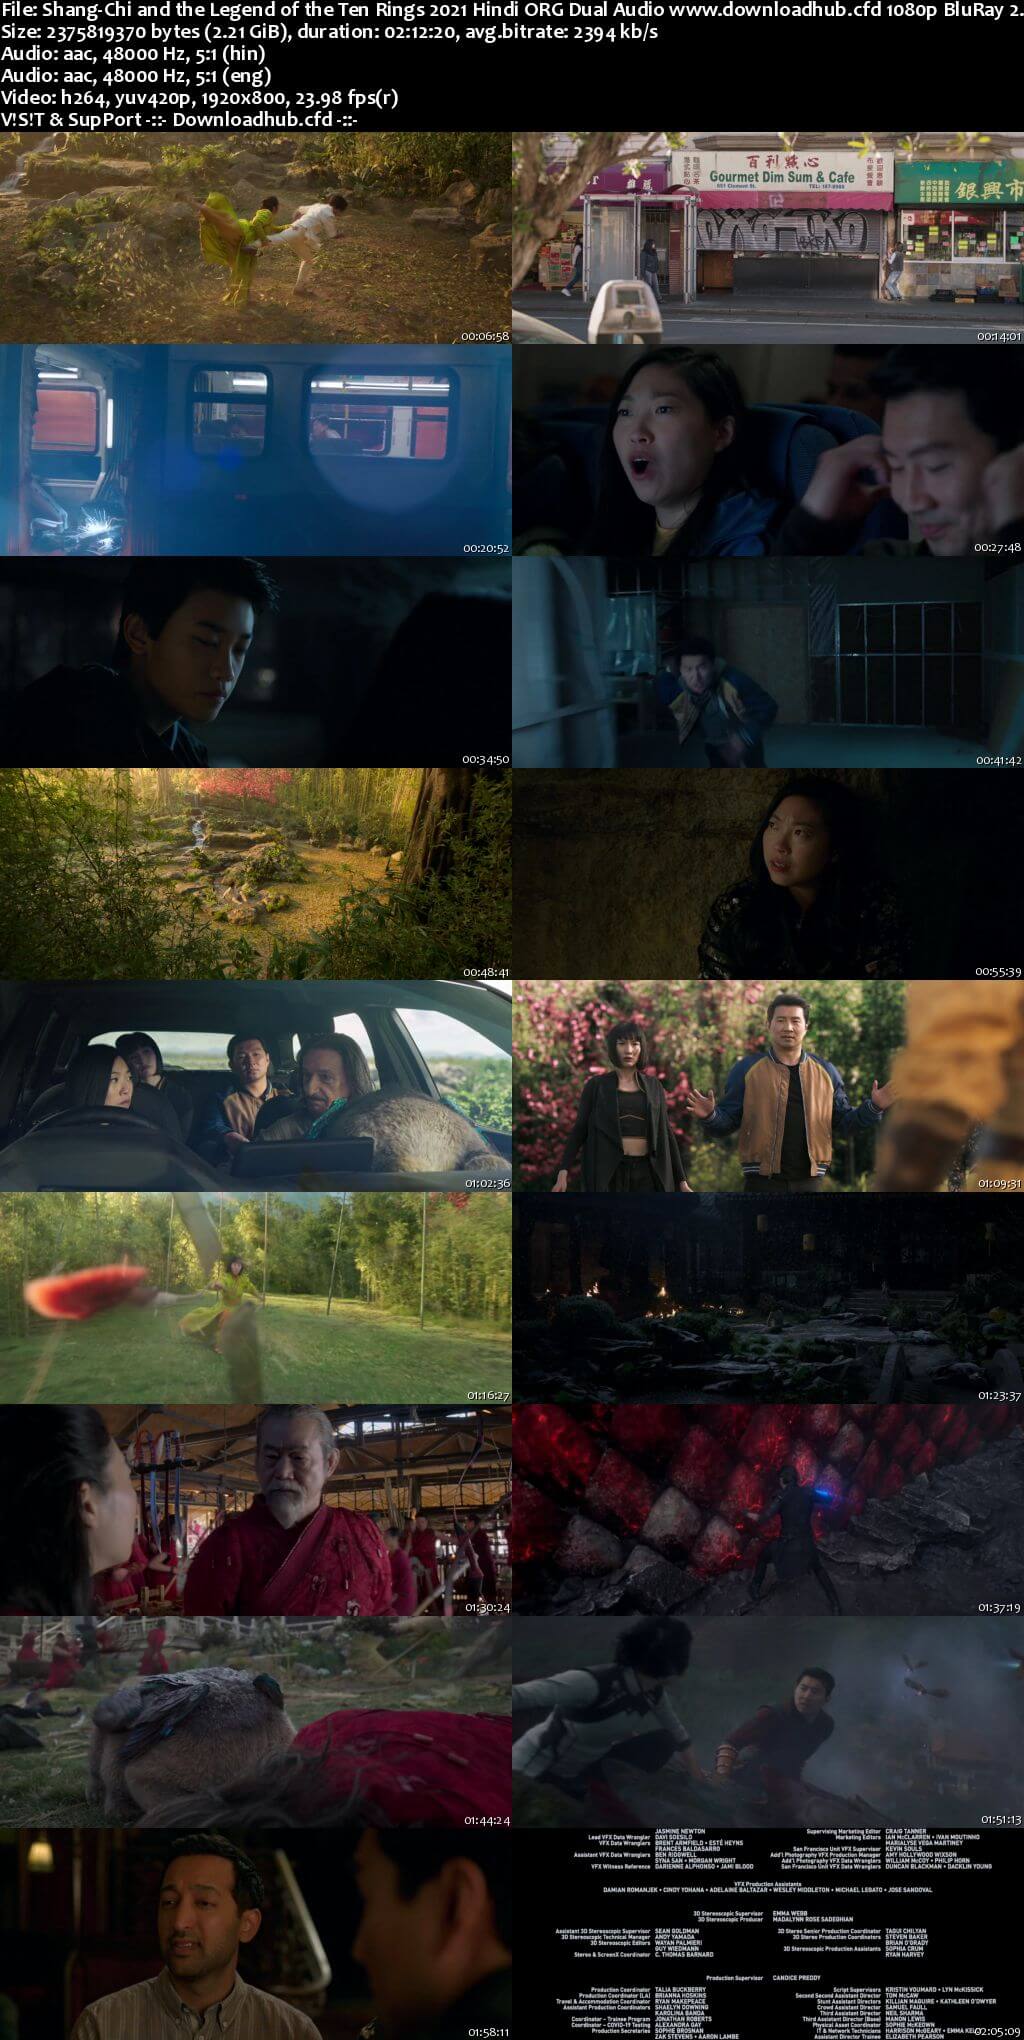 Shang-Chi and the Legend of the Ten Rings 2021 Hindi ORG Dual Audio 1080p BluRay 2.2GB ESubs